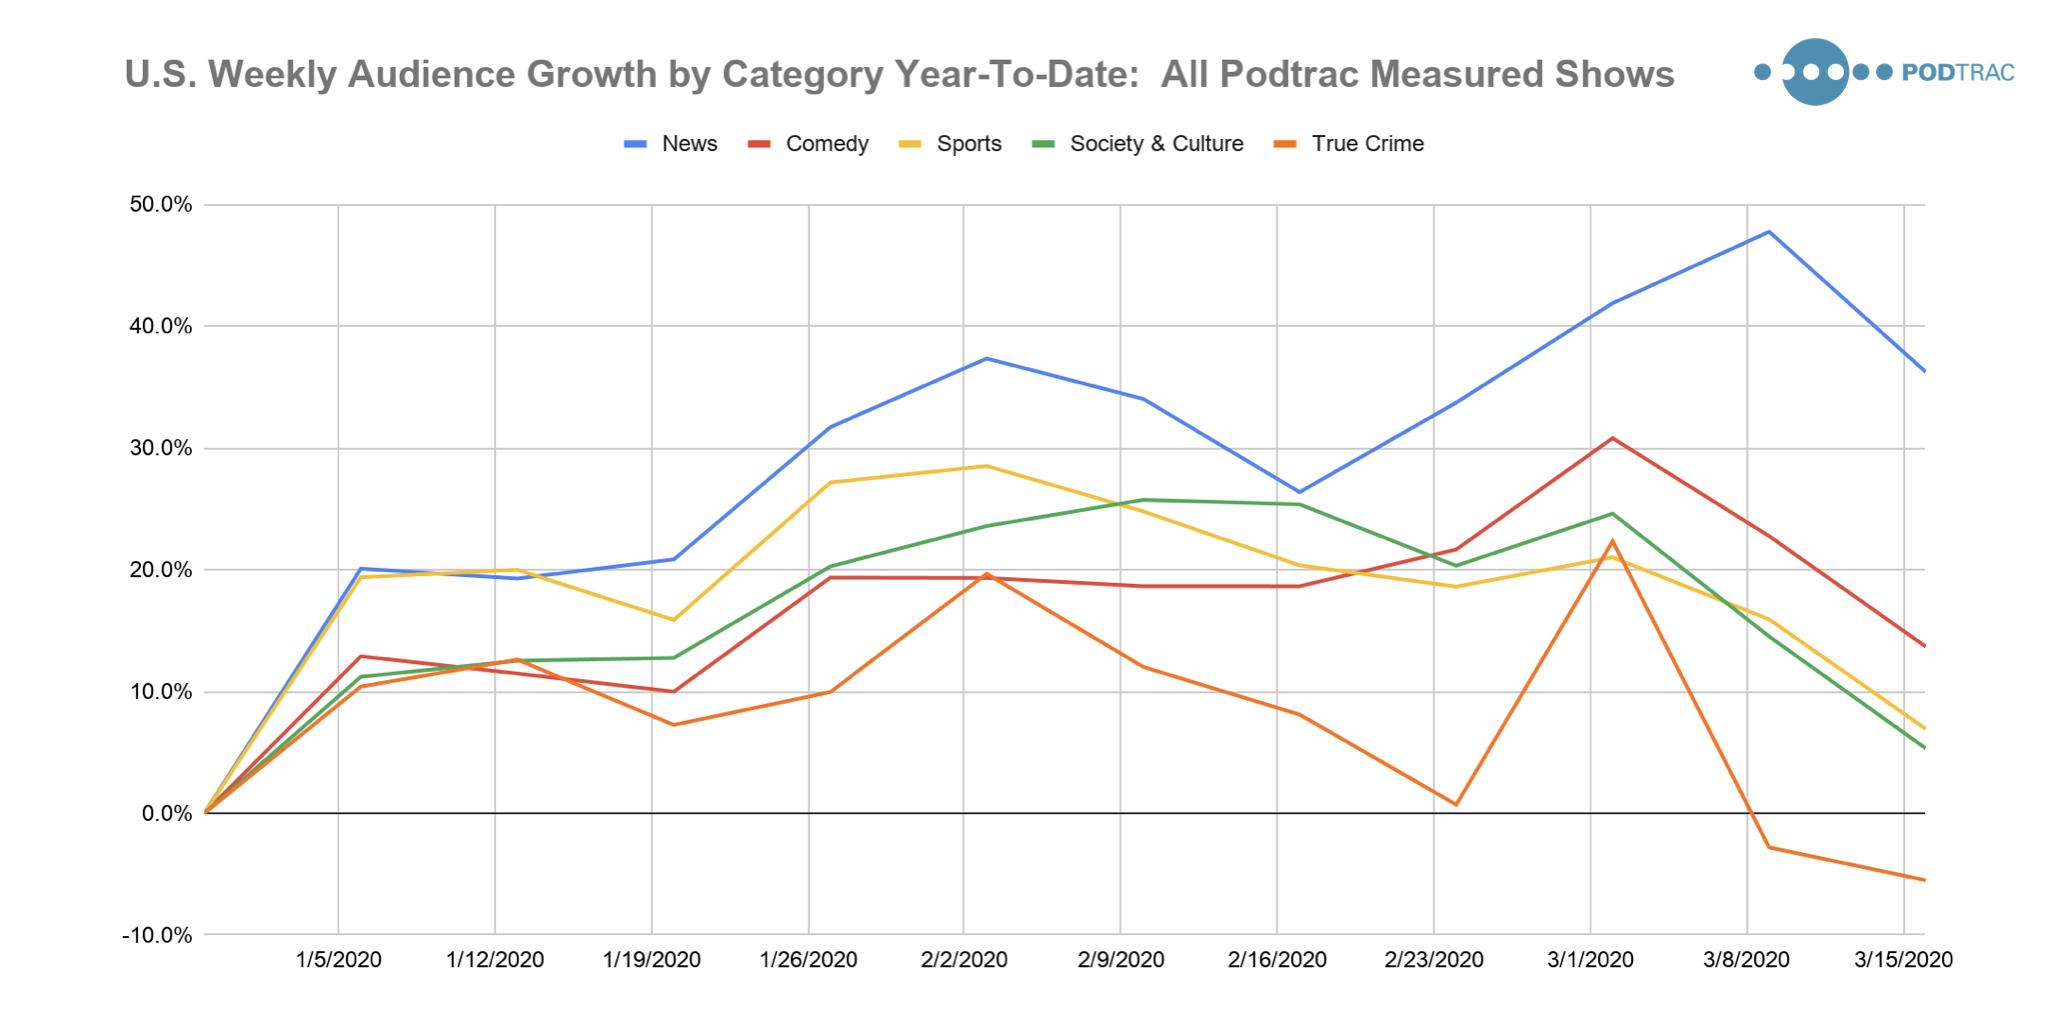 Year-To-Date U.S. Weekly Podcast Audience Growth for Top Categories